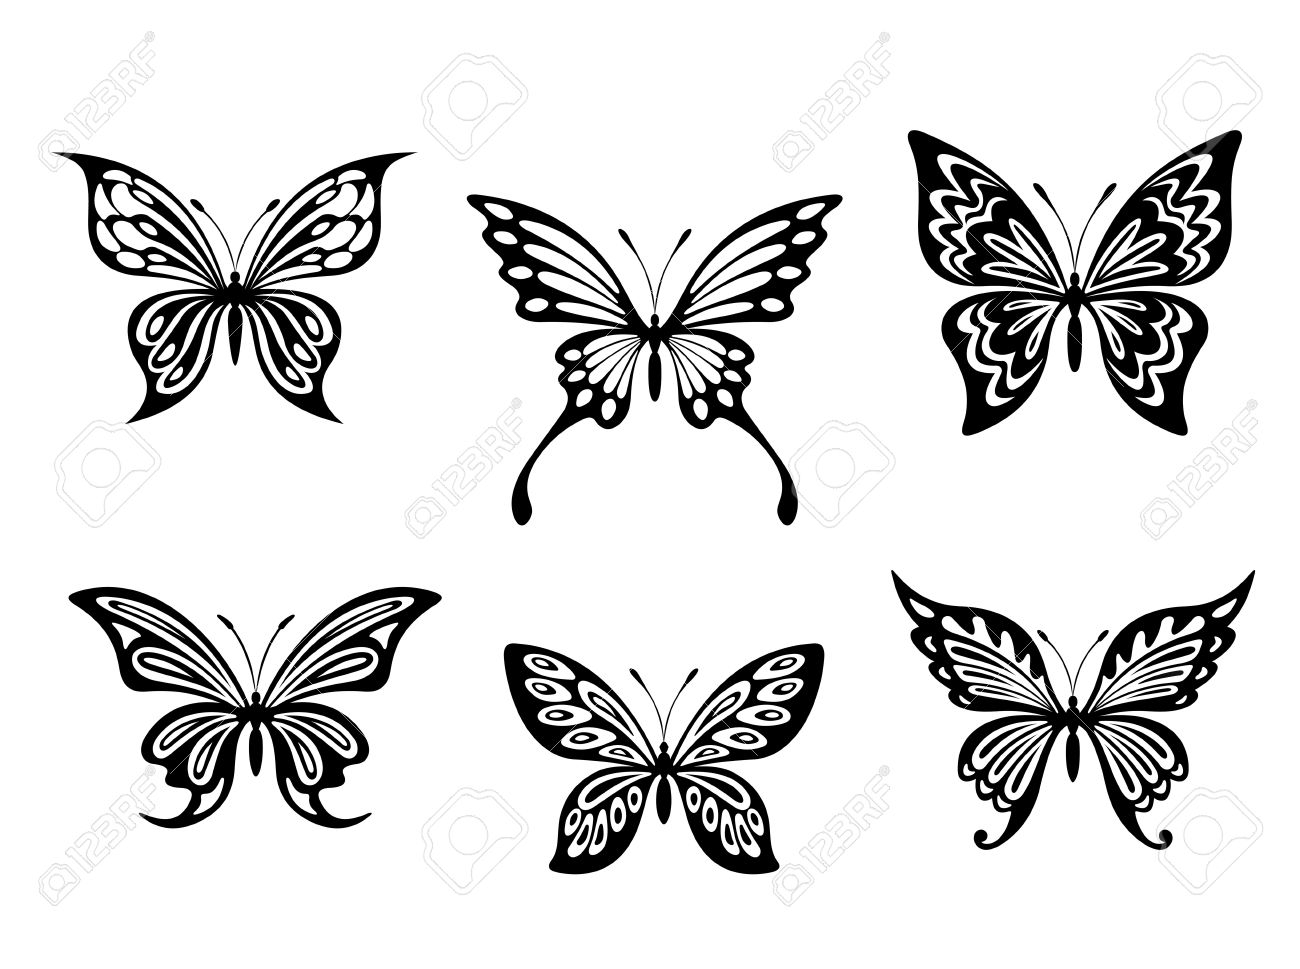 Black Butterfly Tattoos And Silhouettes Isolated On White Background intended for sizing 1300 X 969